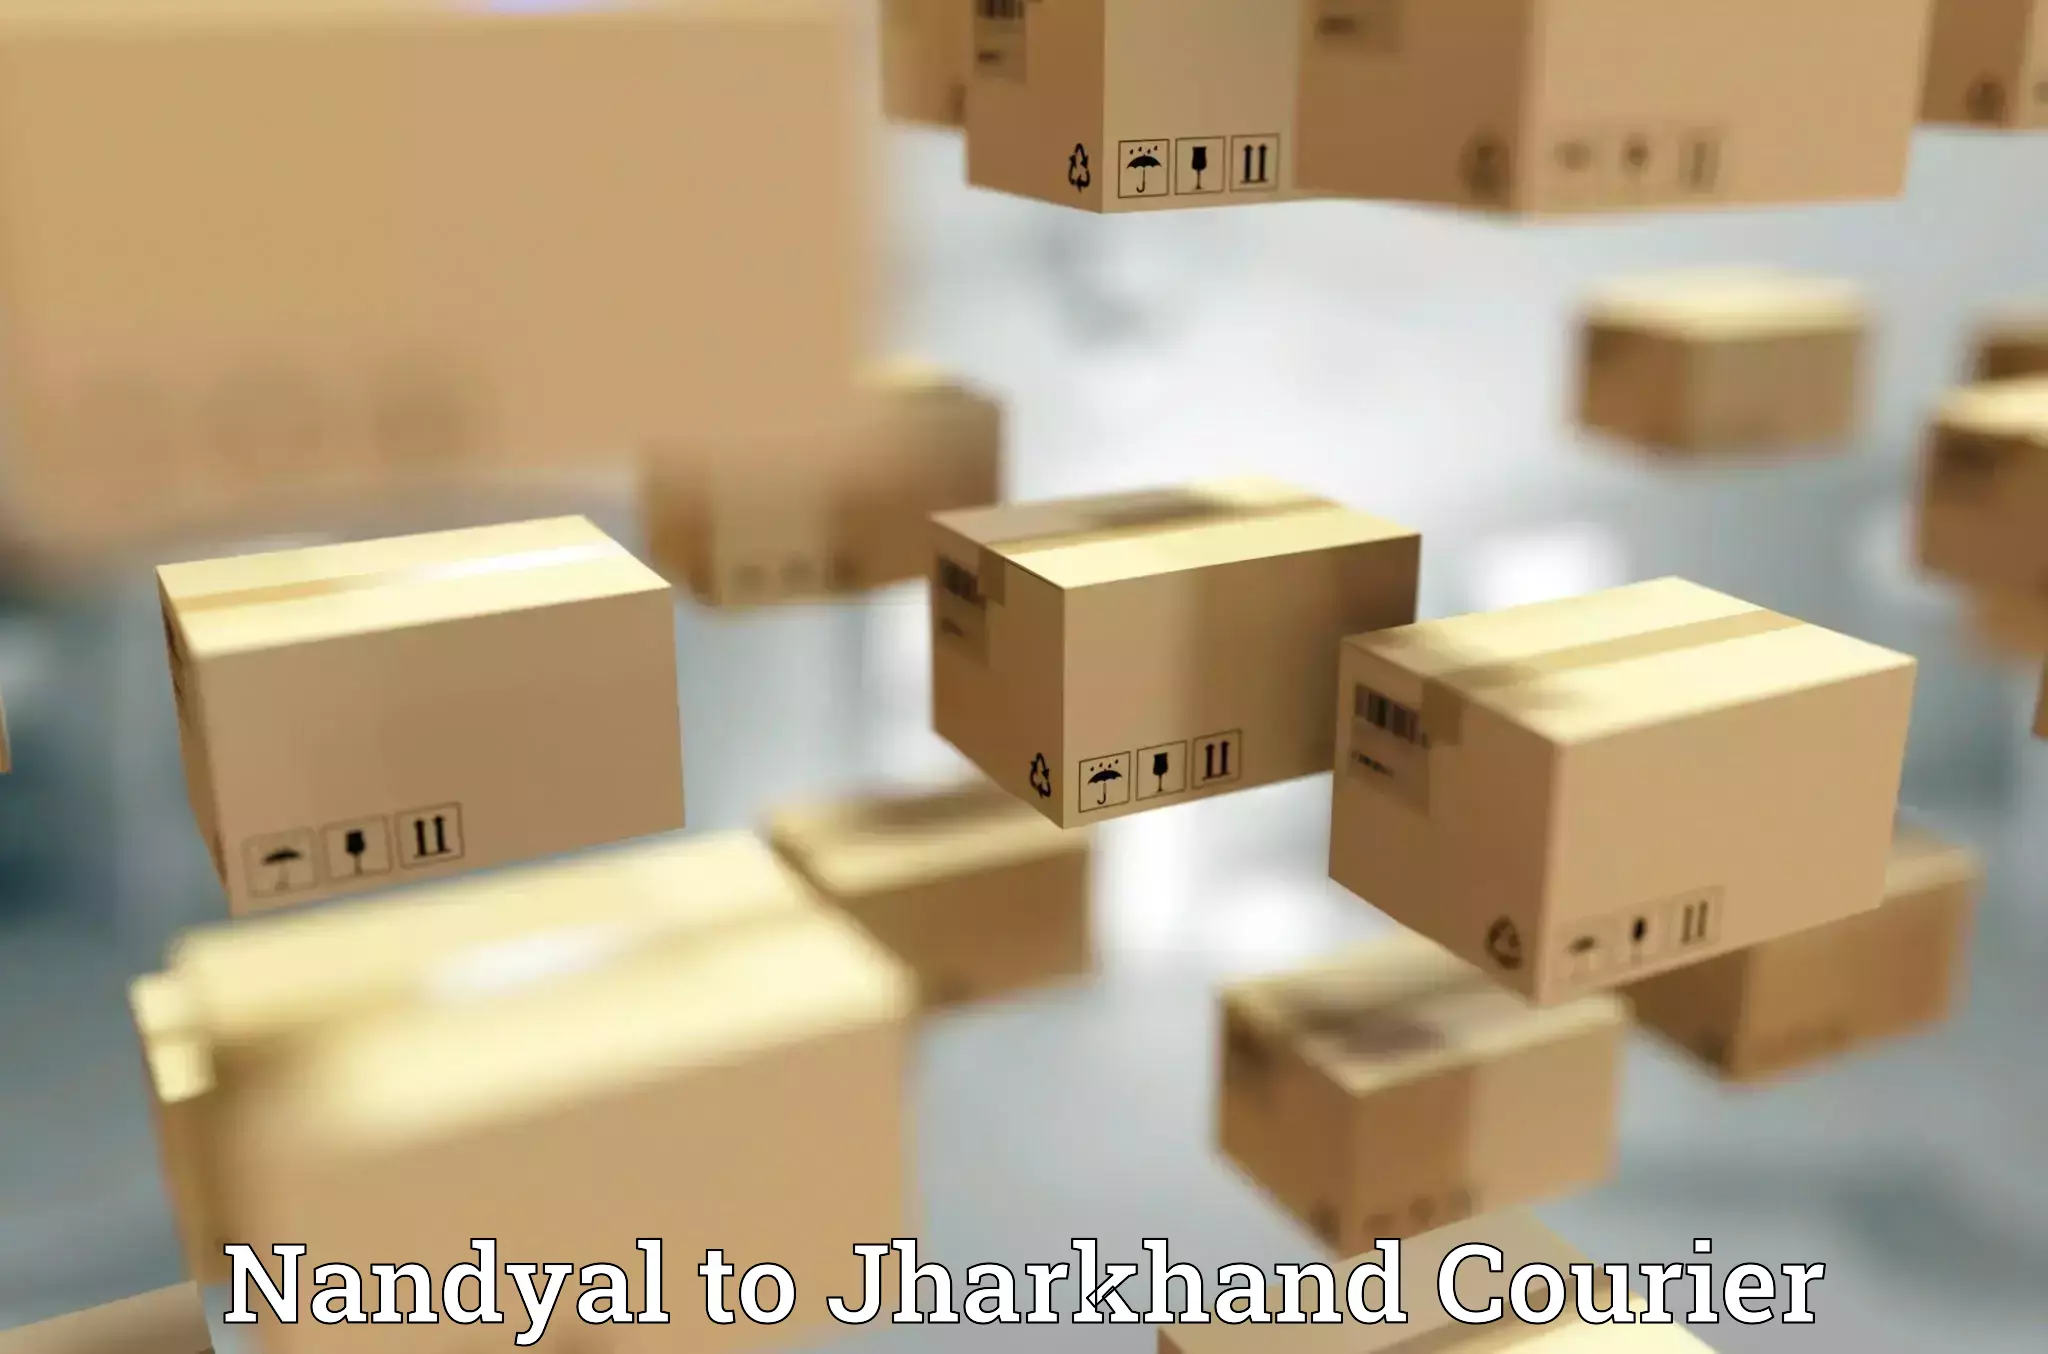 Package delivery network Nandyal to Jharkhand